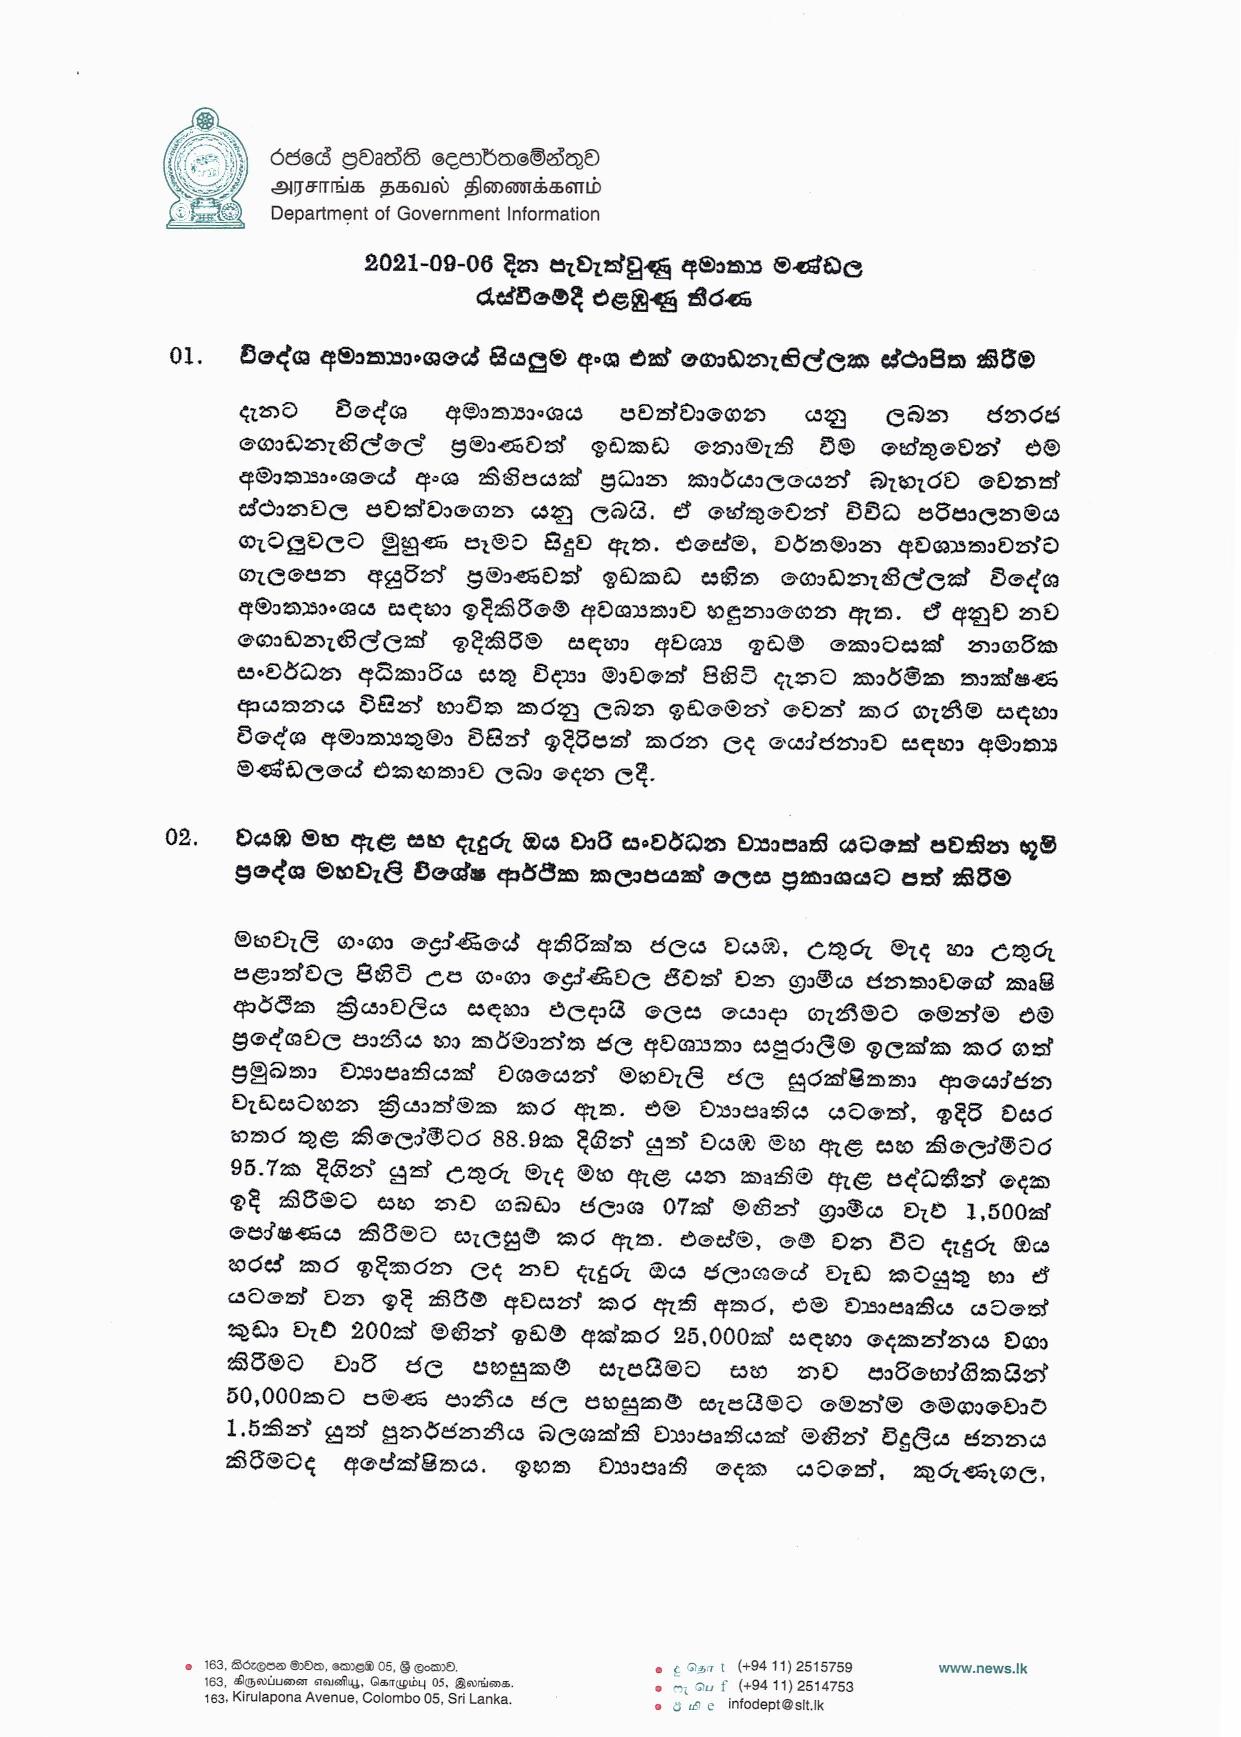 Cabinet Decision on 06.09.2021 Sinhala page 001